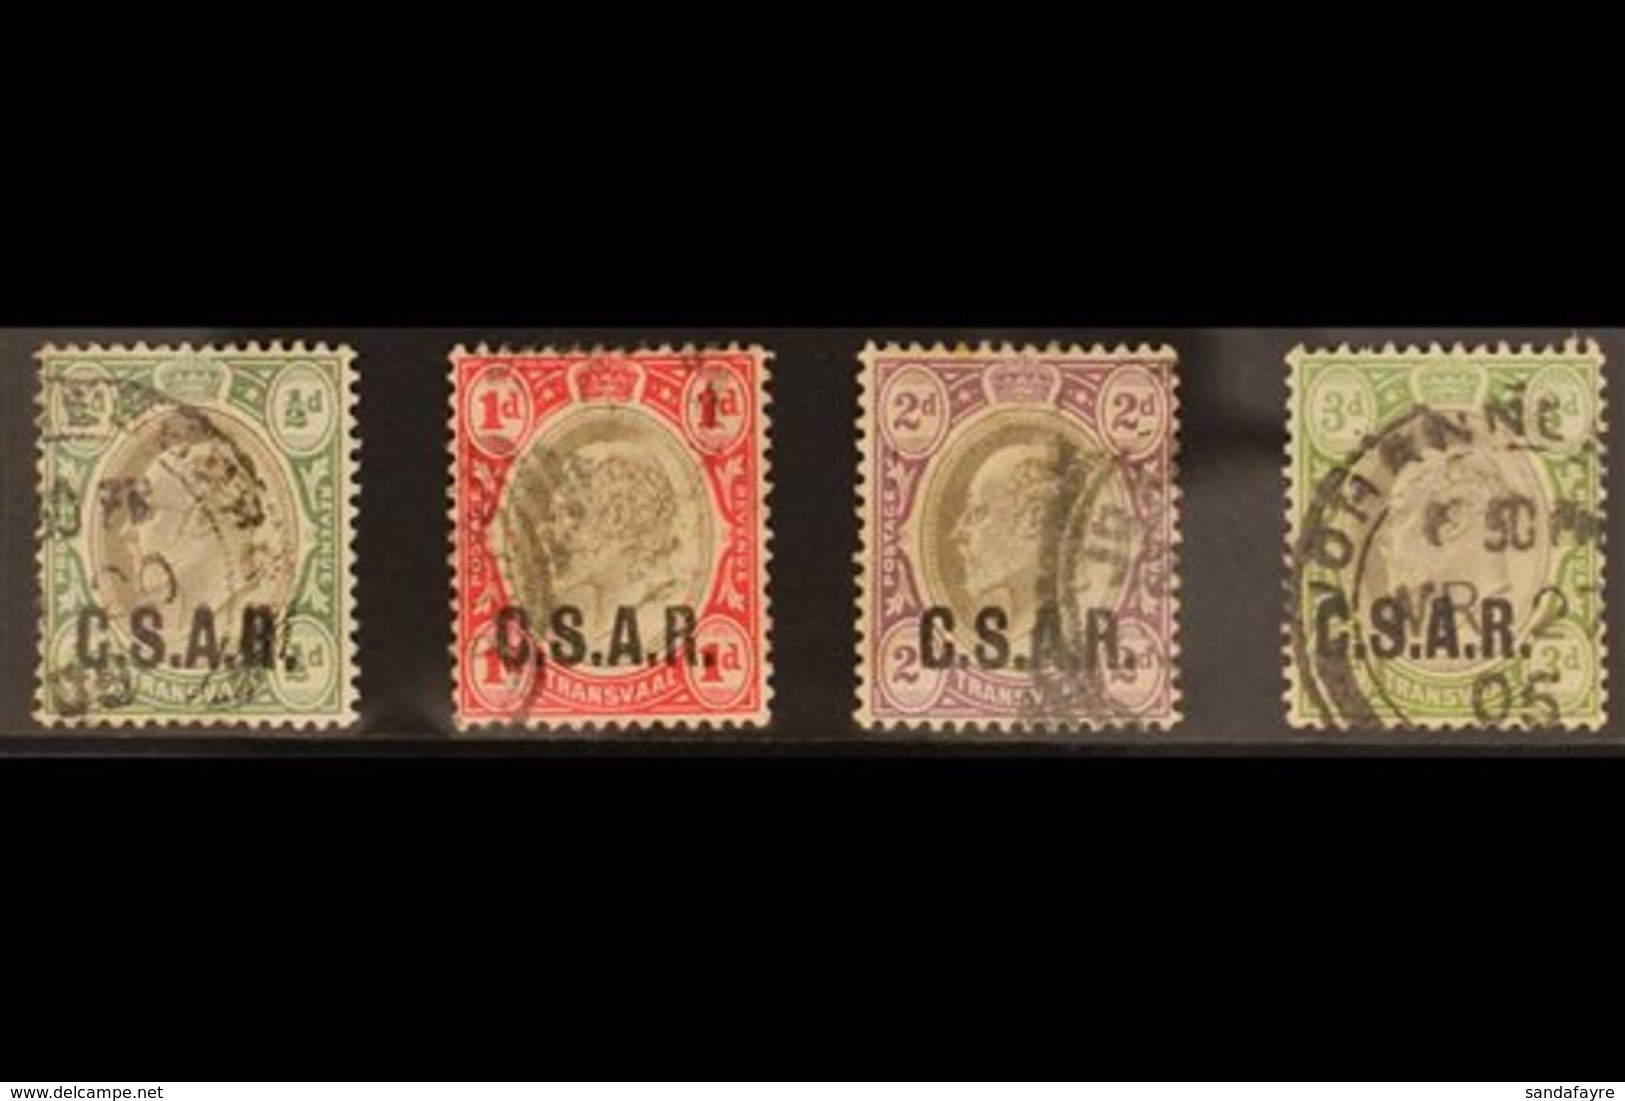 TRANSVAAL RAILWAY OFFICIAL STAMPS 1905 ½d, 1d, 2d, And 3d With "C.S.A.R." Overprints, SG RO3/RO6, Fine Used. (4 Stamps)  - Unclassified